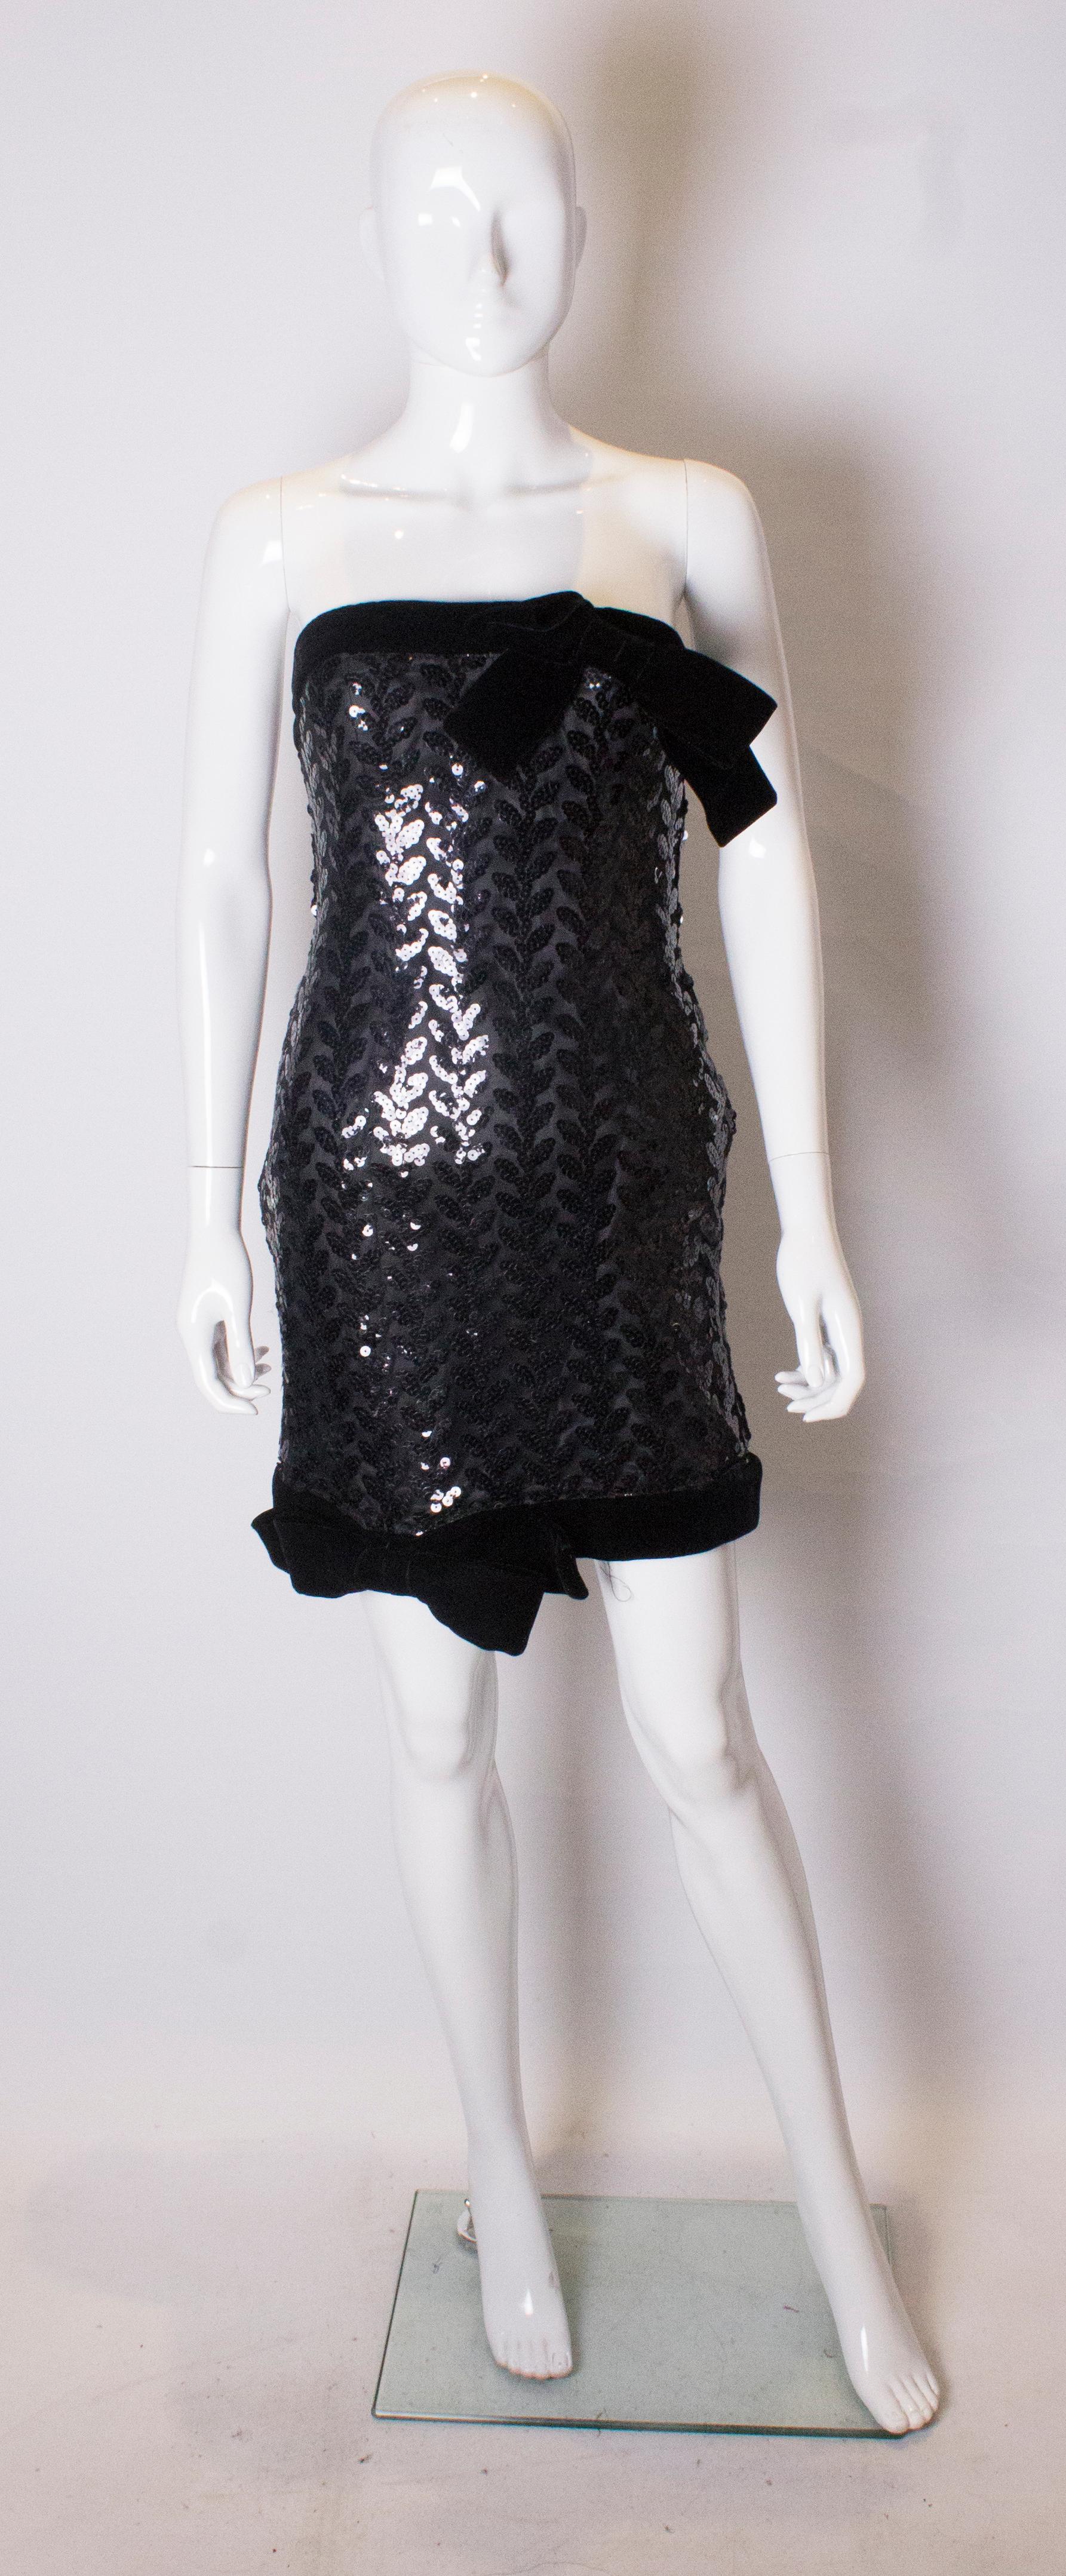 A chic cocktail dress by Victor Costa . The dress is strapless with the body of the dress covered in sequins with a velvet band at the top and hem. Labelled style 8160 F.
Measurements Bust 34'', length 28'' shoulder to hem aprox 36''